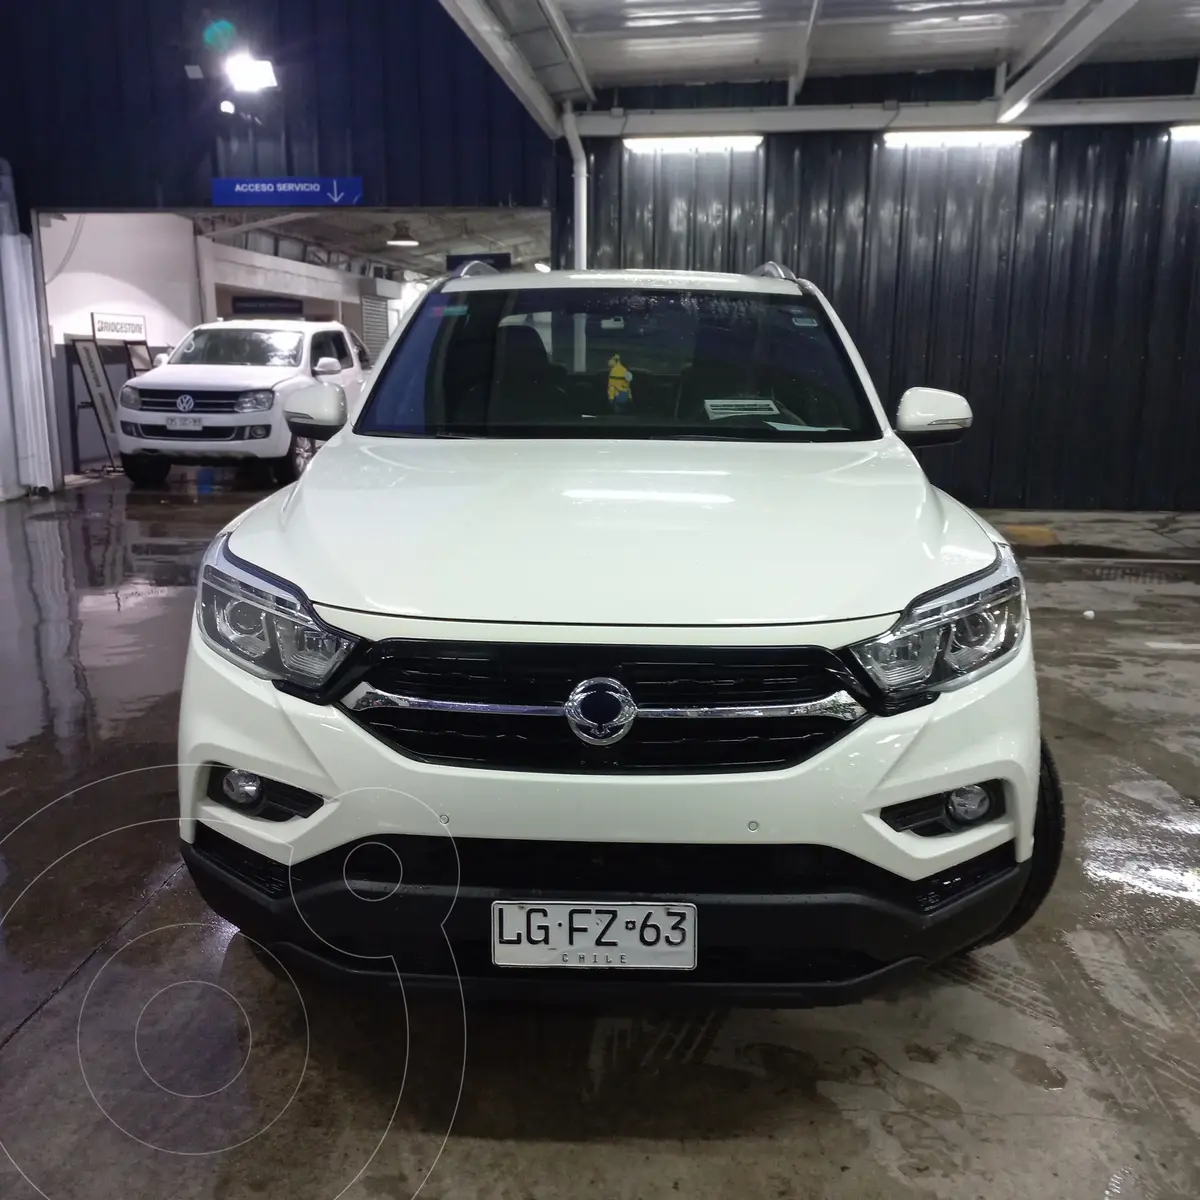 SsangYong Musso Deluxe diesel 2.2L